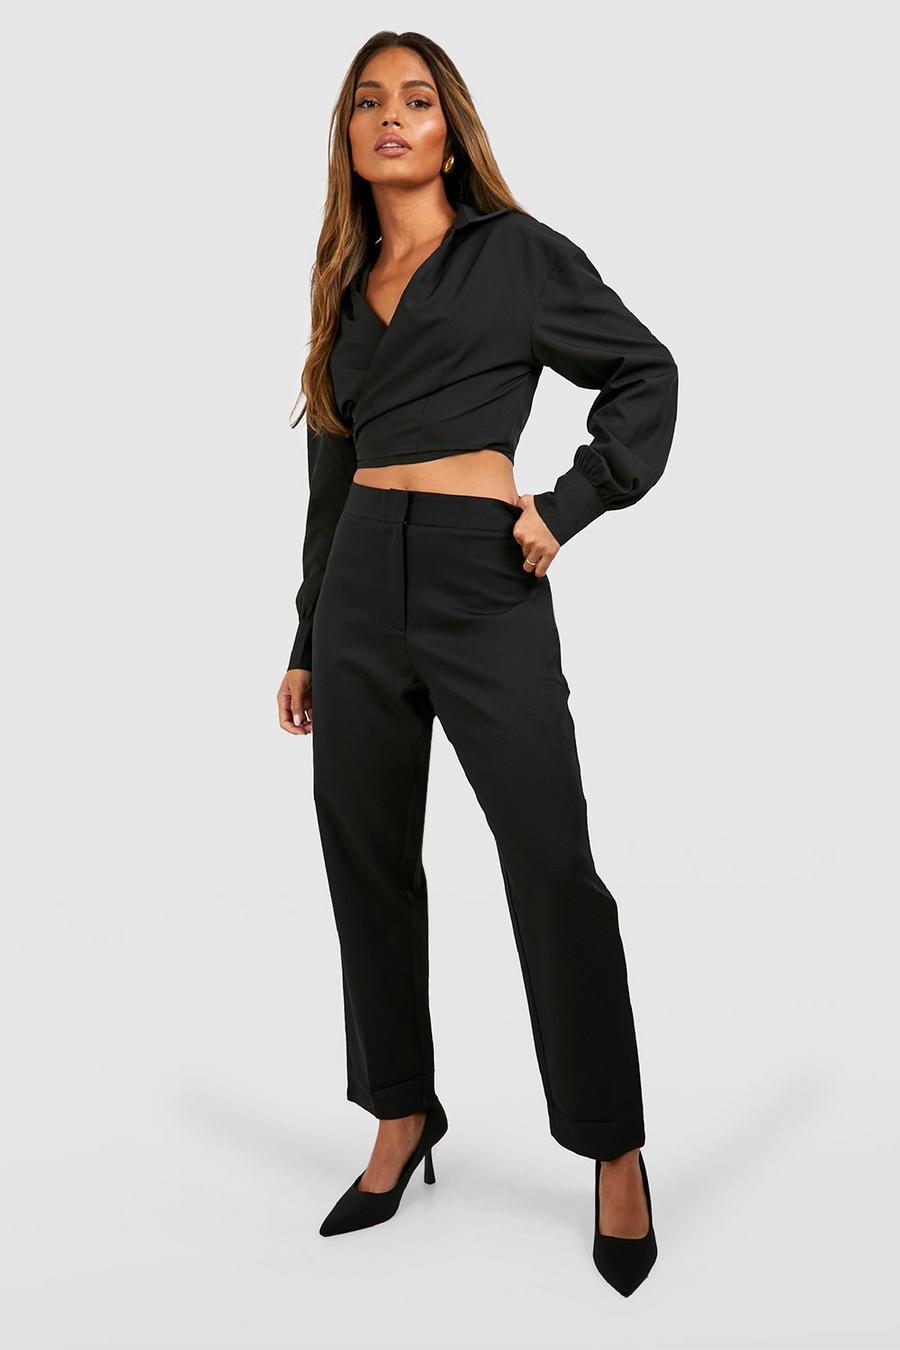 Women High-Waisted Cigarette Pants Work Office Casual Tapered Long Slim  Trousers